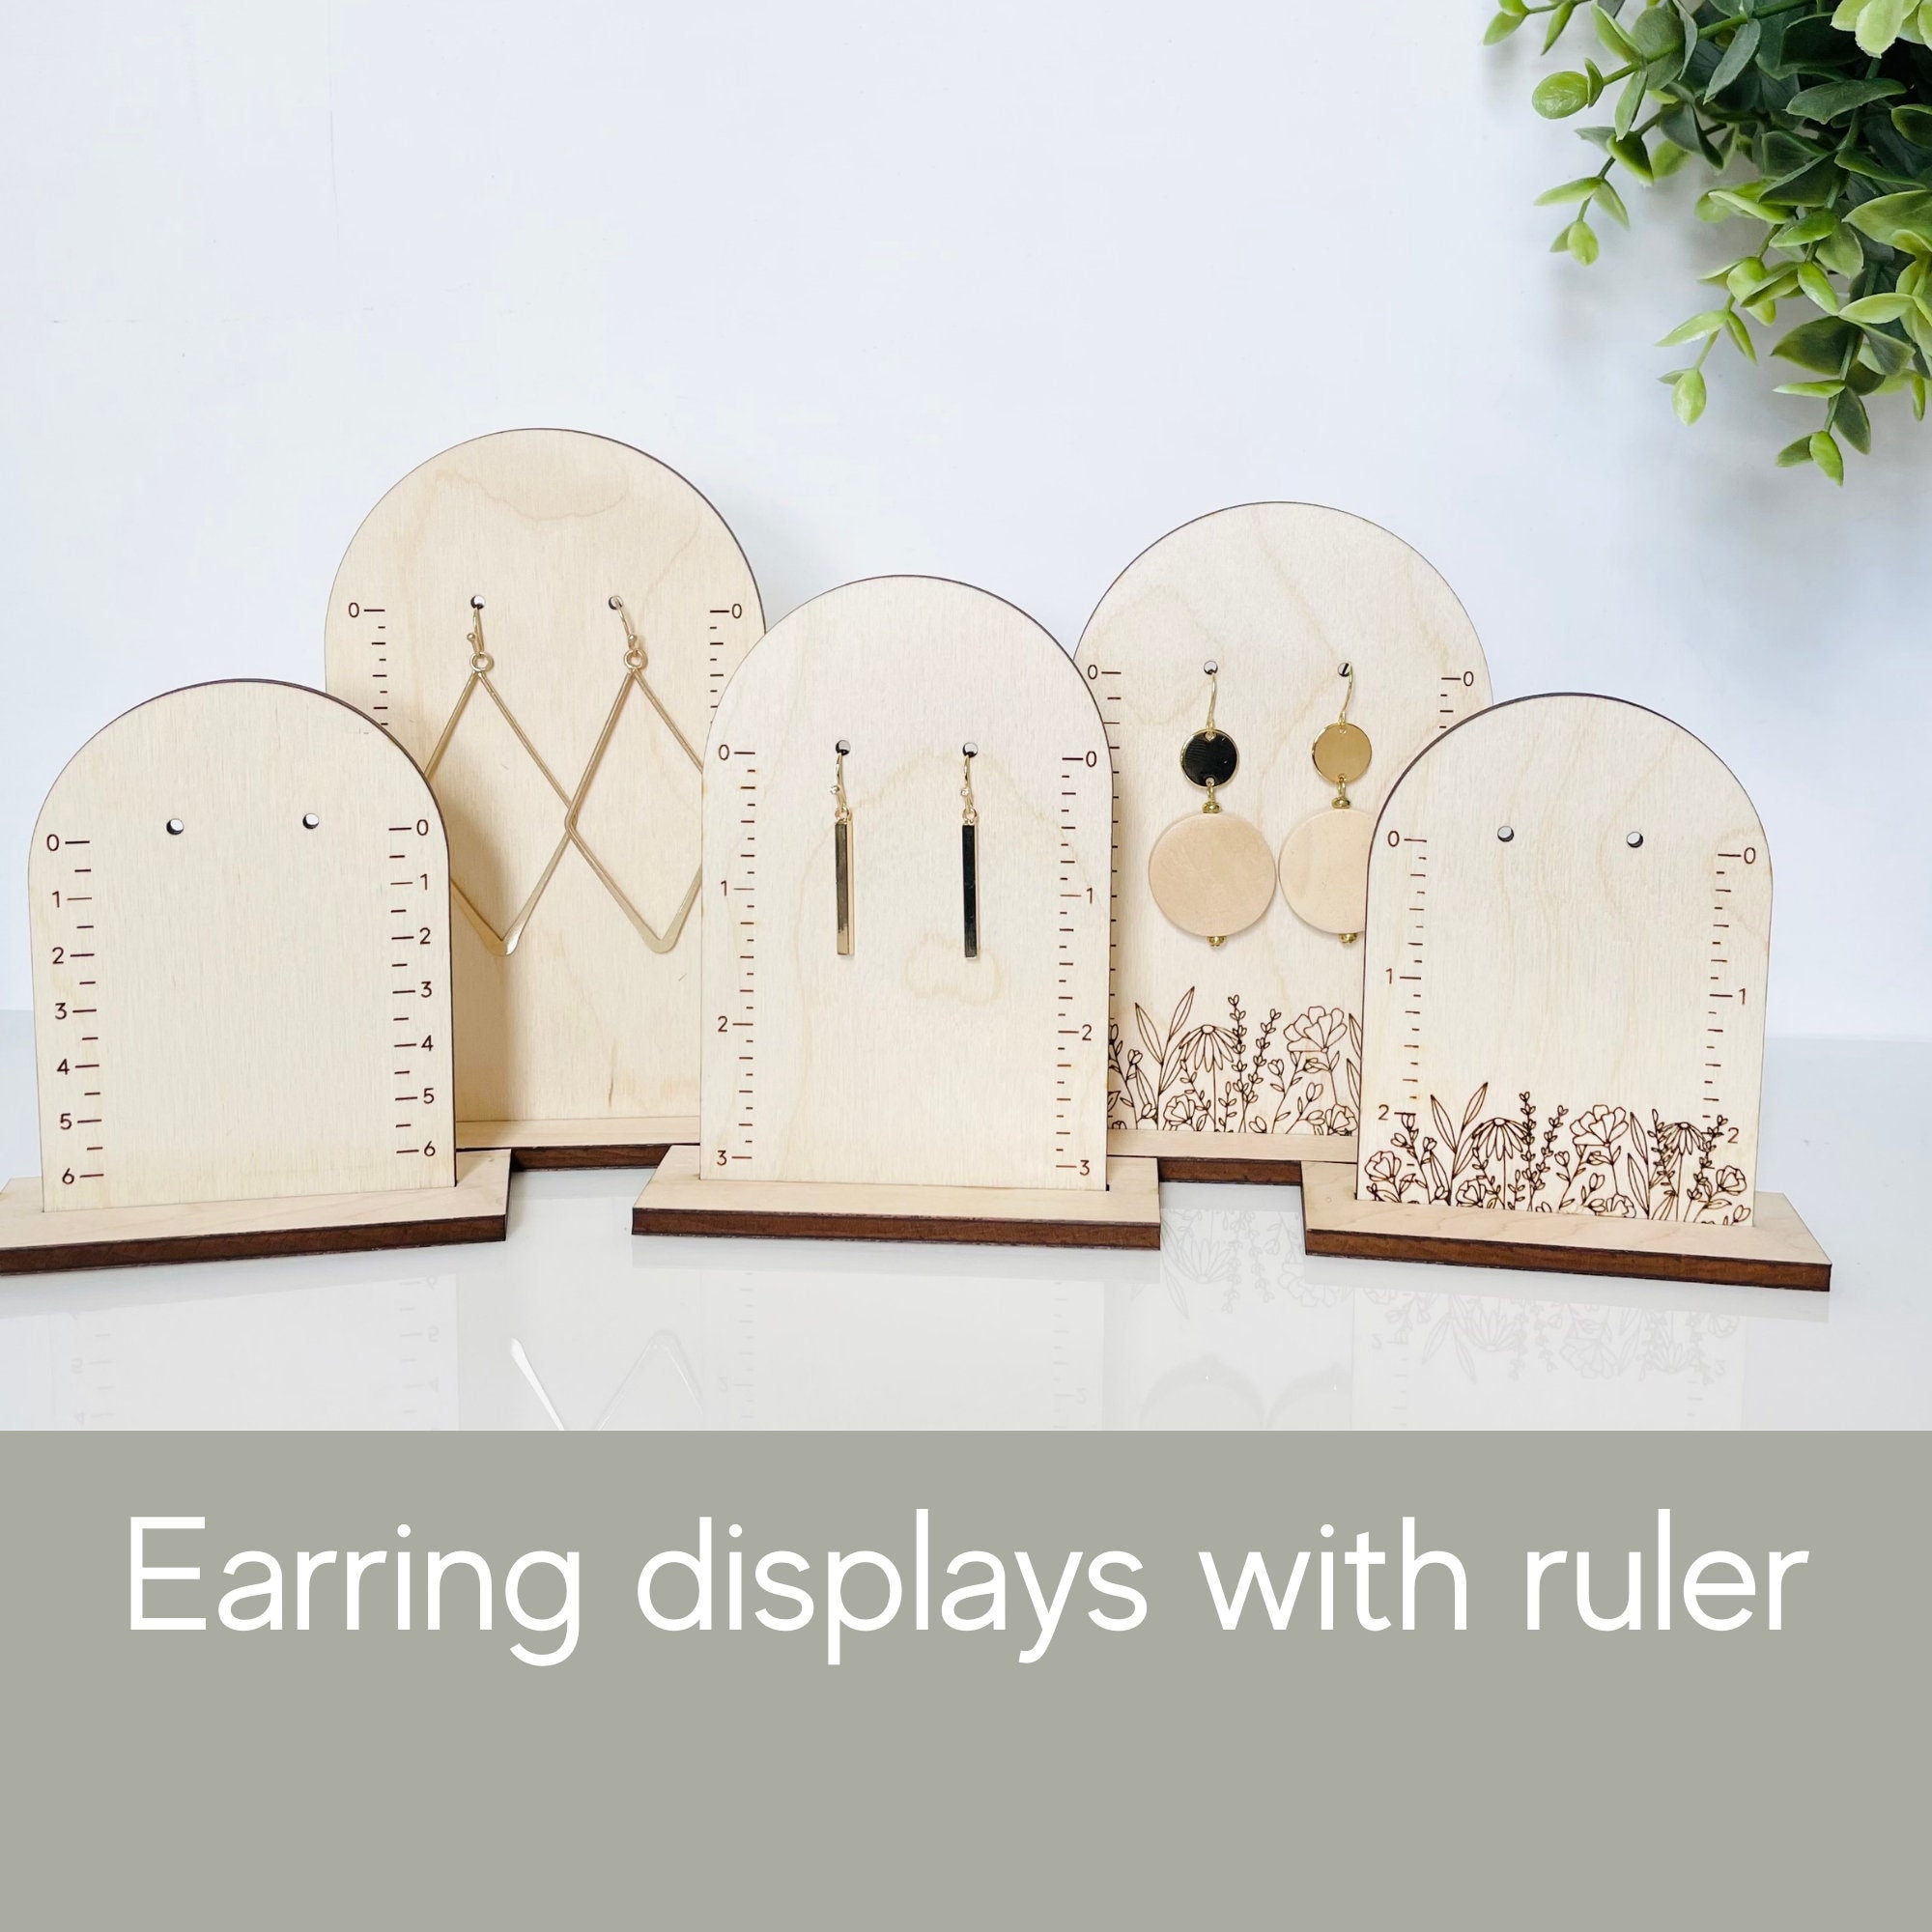  HULISEN Earring Display Stands for Selling, Adjustable Height Earring  Displays for Vendor Events, Craft Shows, Jewelry Display Rack Holder with  Wood Tray for Selling Earring Cards, Keychains, 30 Hooks : Clothing